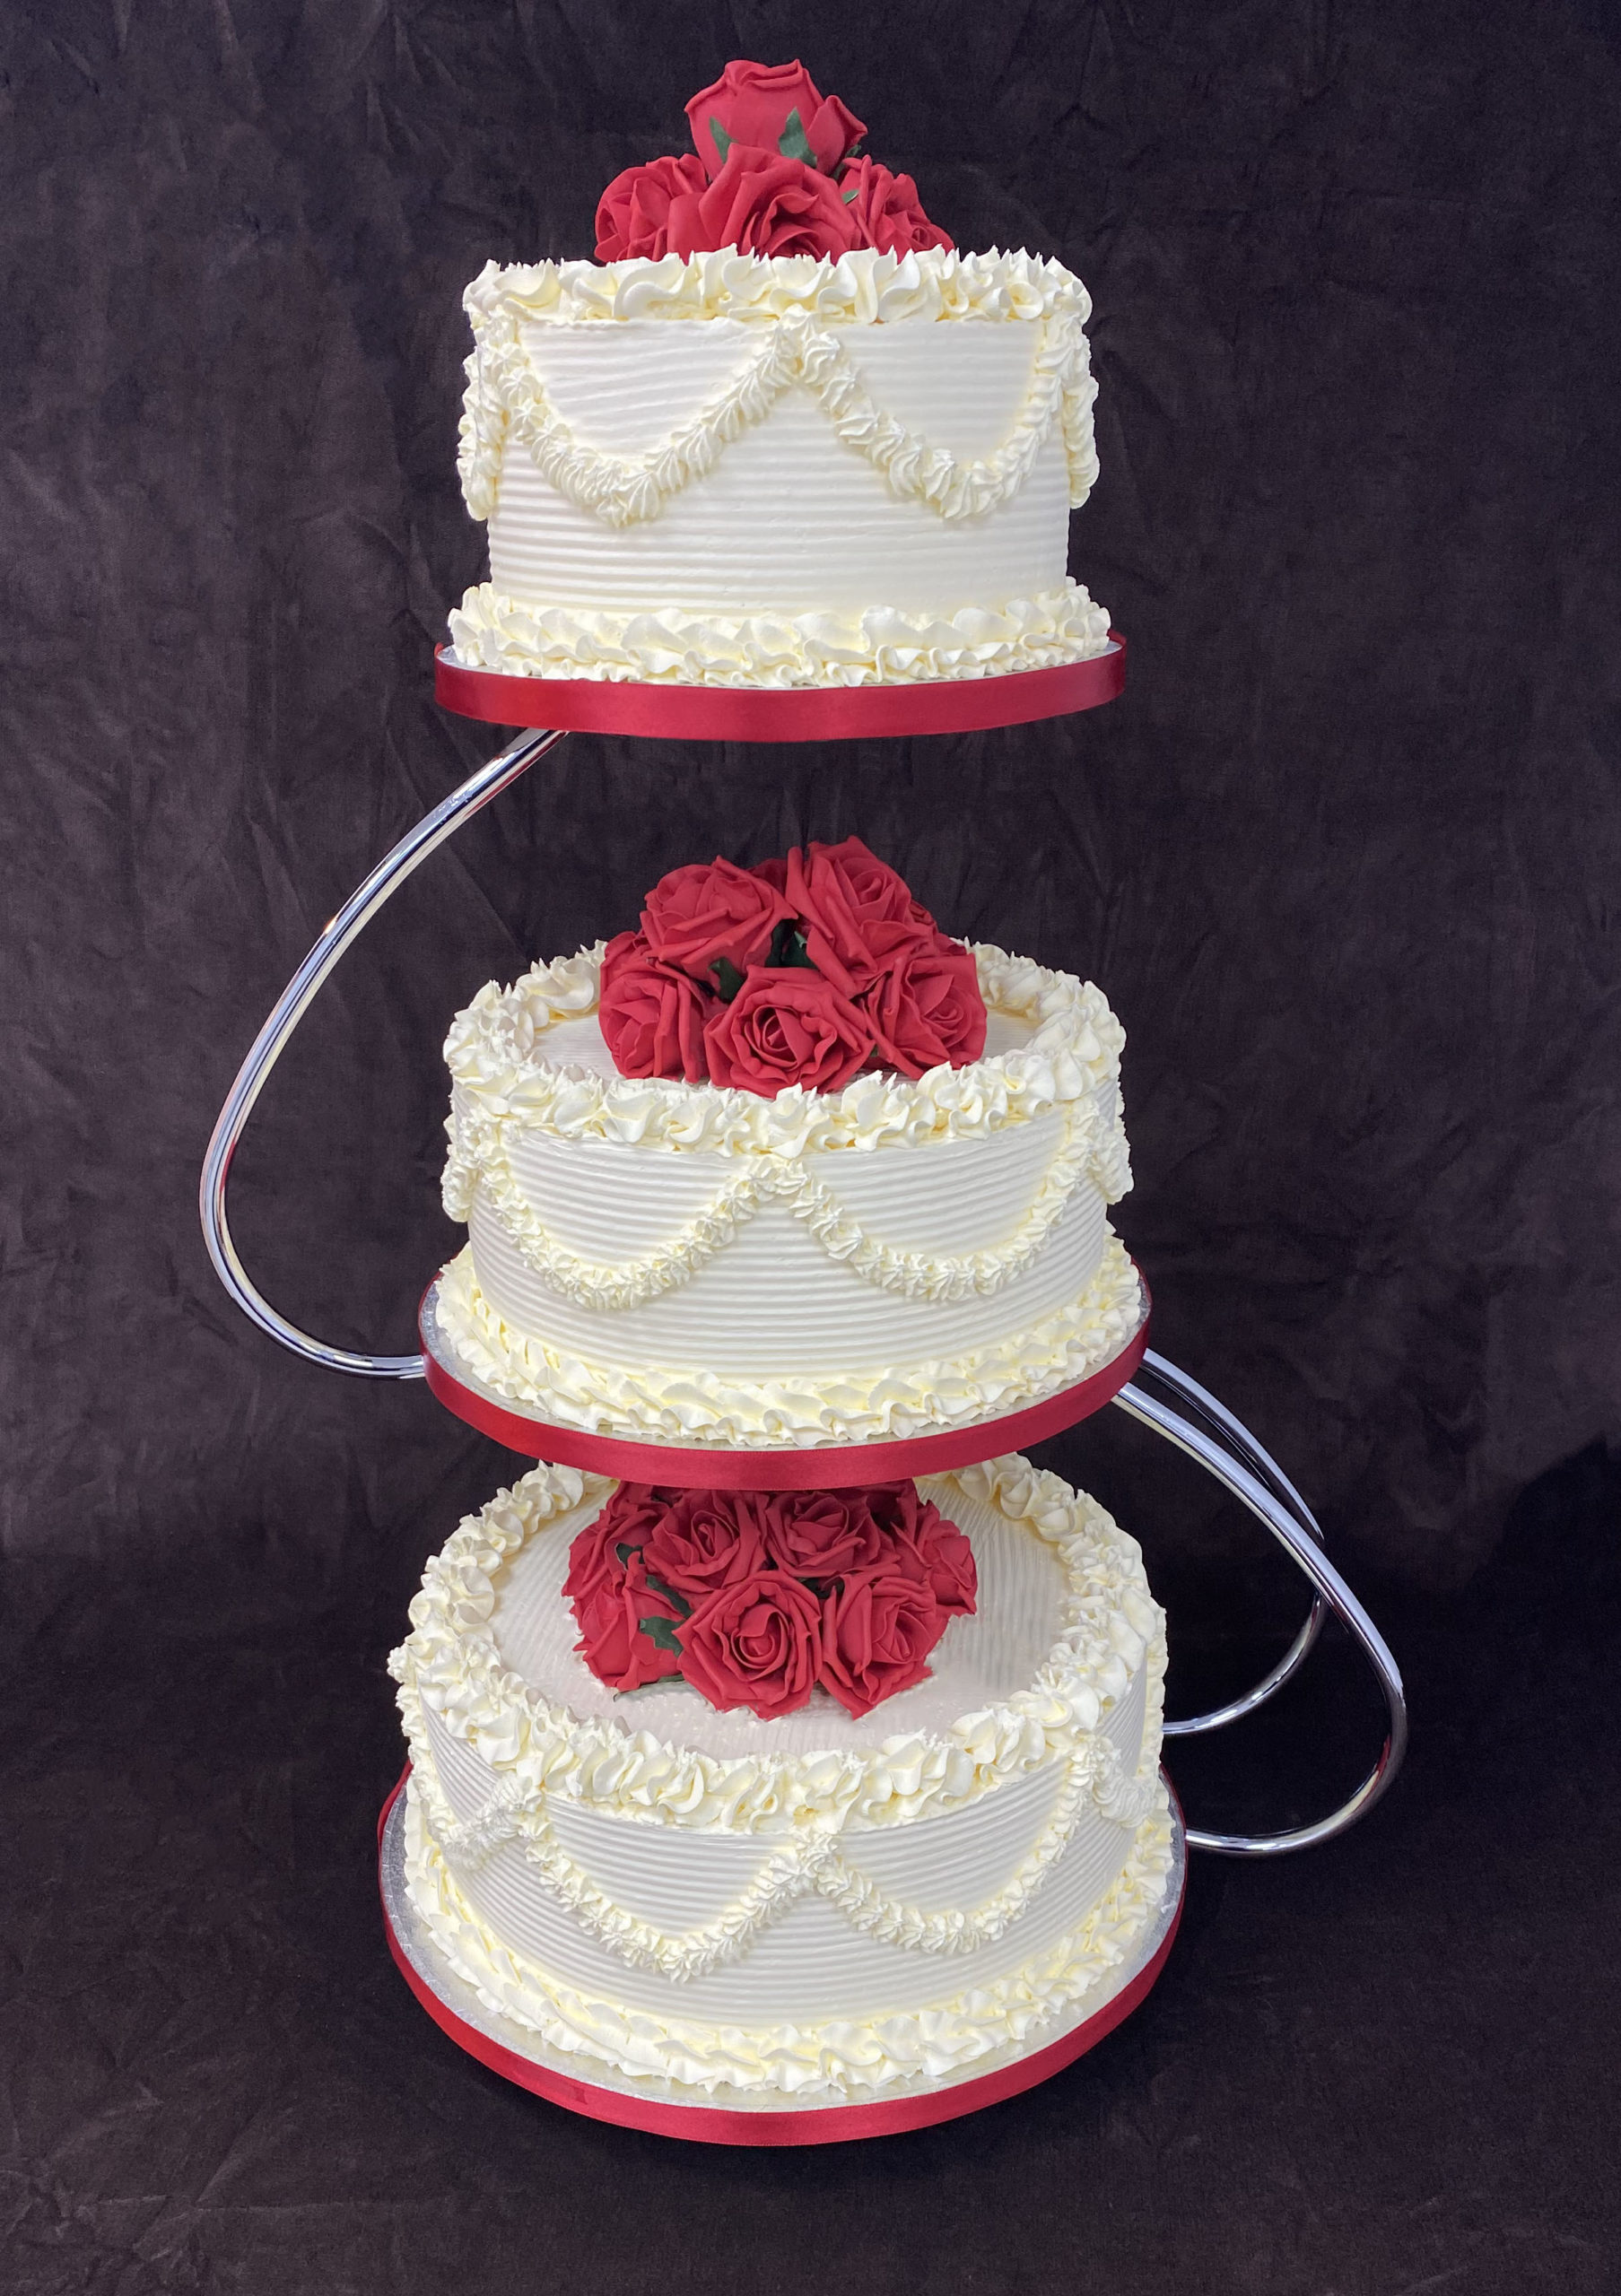 wed 7 scaled <div class="woocommerce-product-details__short-description" style="text-align: center;">3 Tier wedding cake on a stand with red flowers</div>